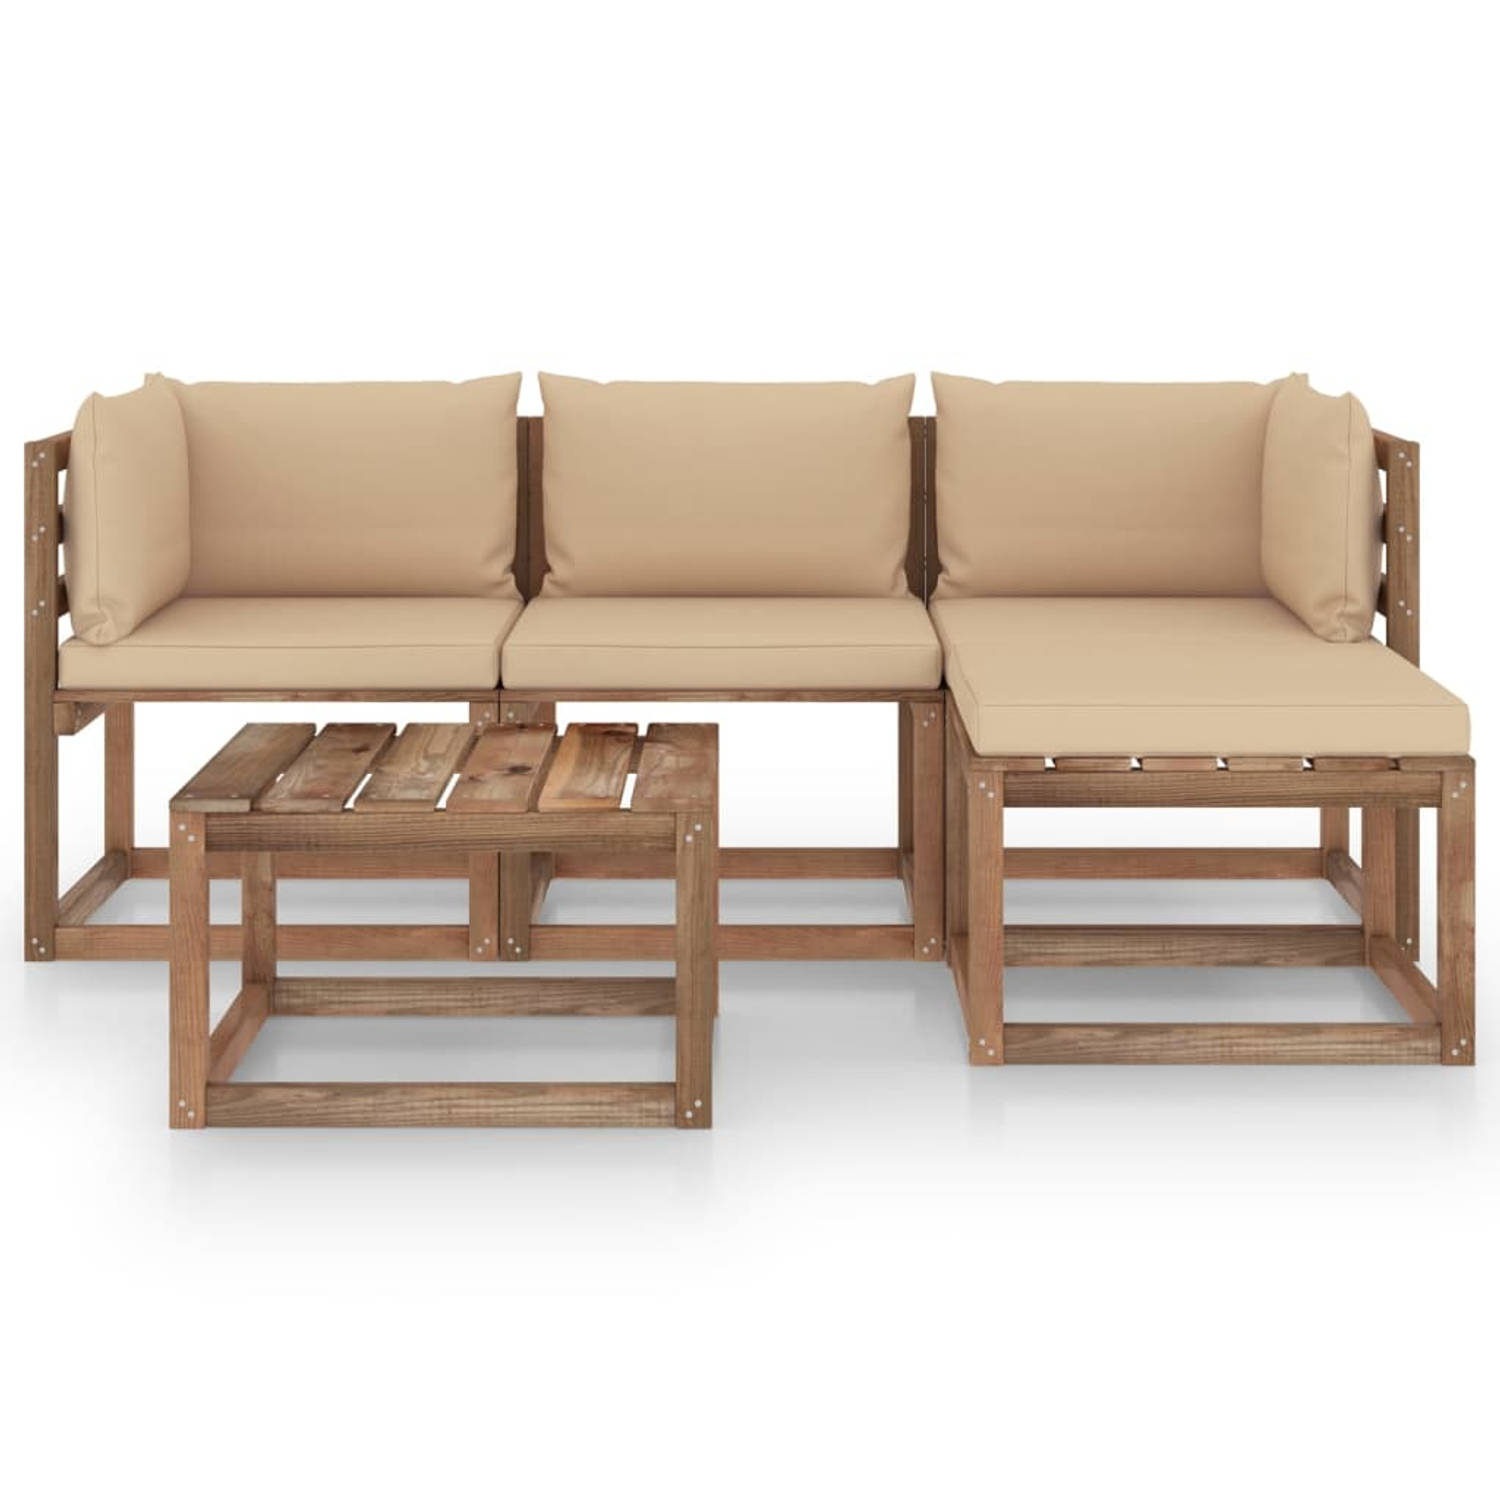 The Living Store Tuinset Grenenhout - Lounge - 64x64x70 cm - Beige kussens